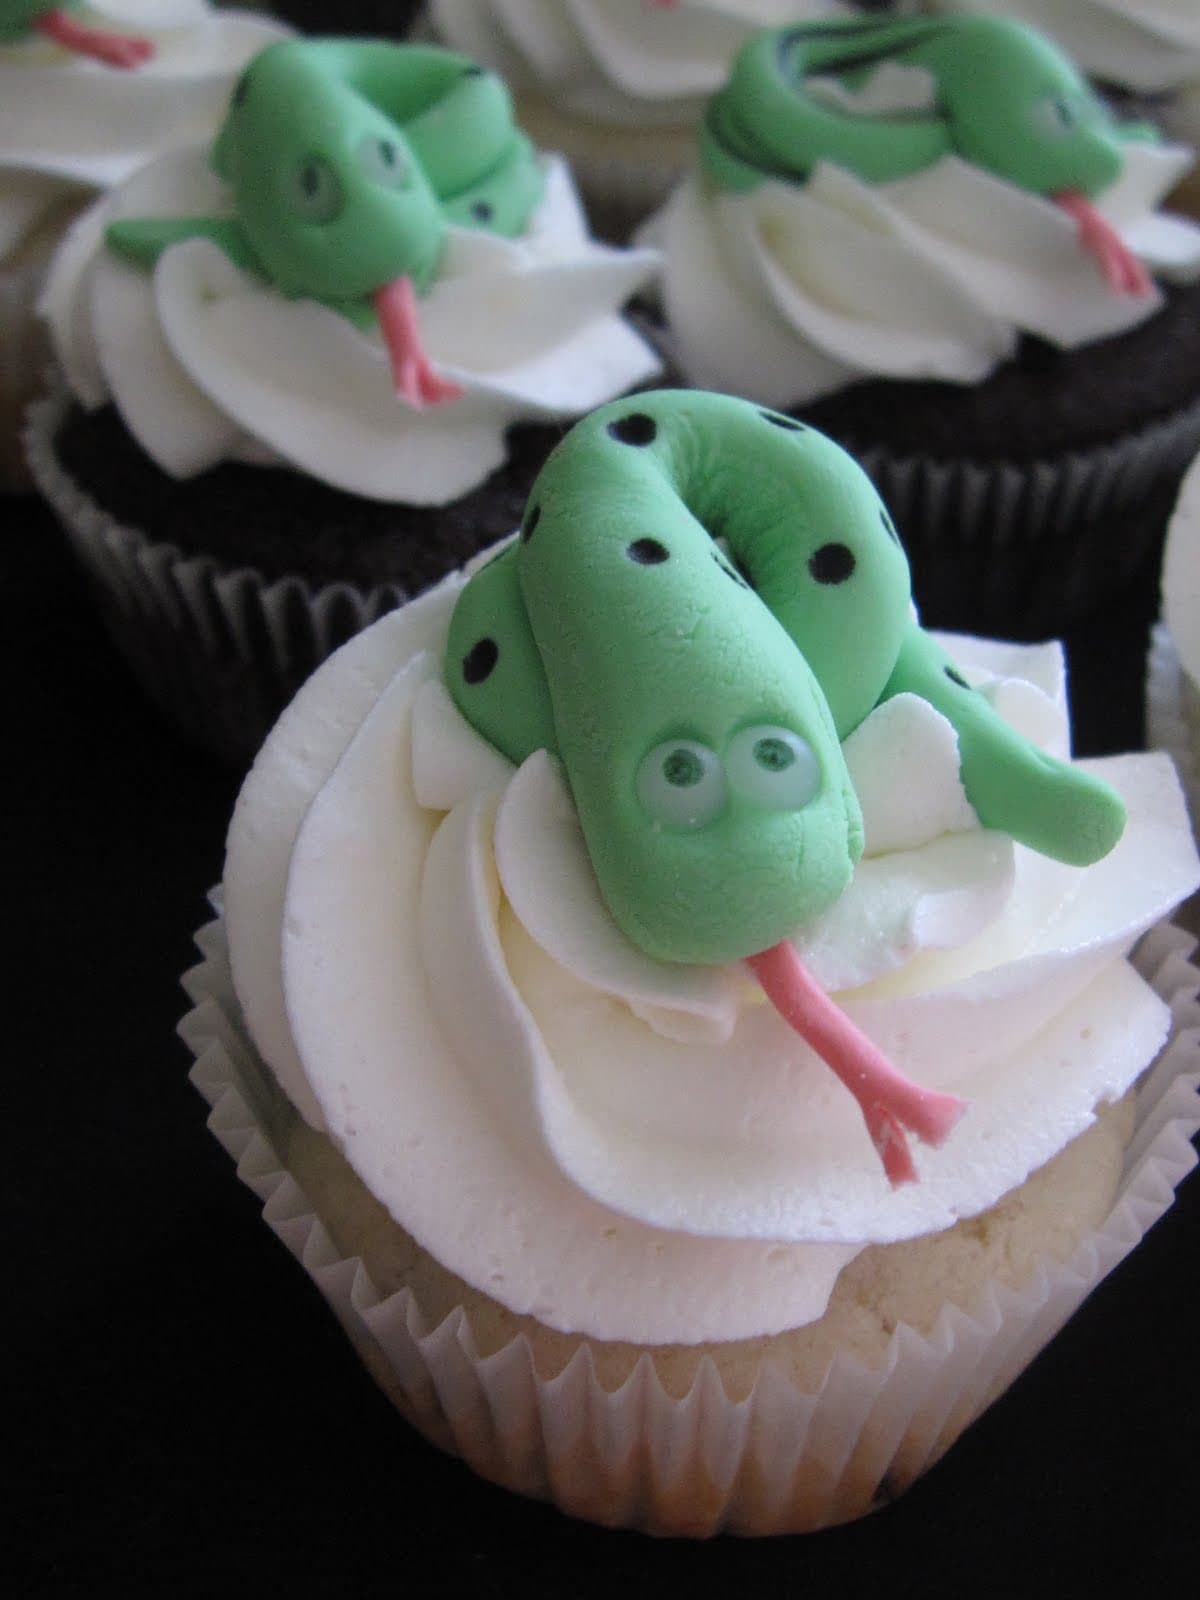 Overhead view of cupcakes with fondant snake toppers